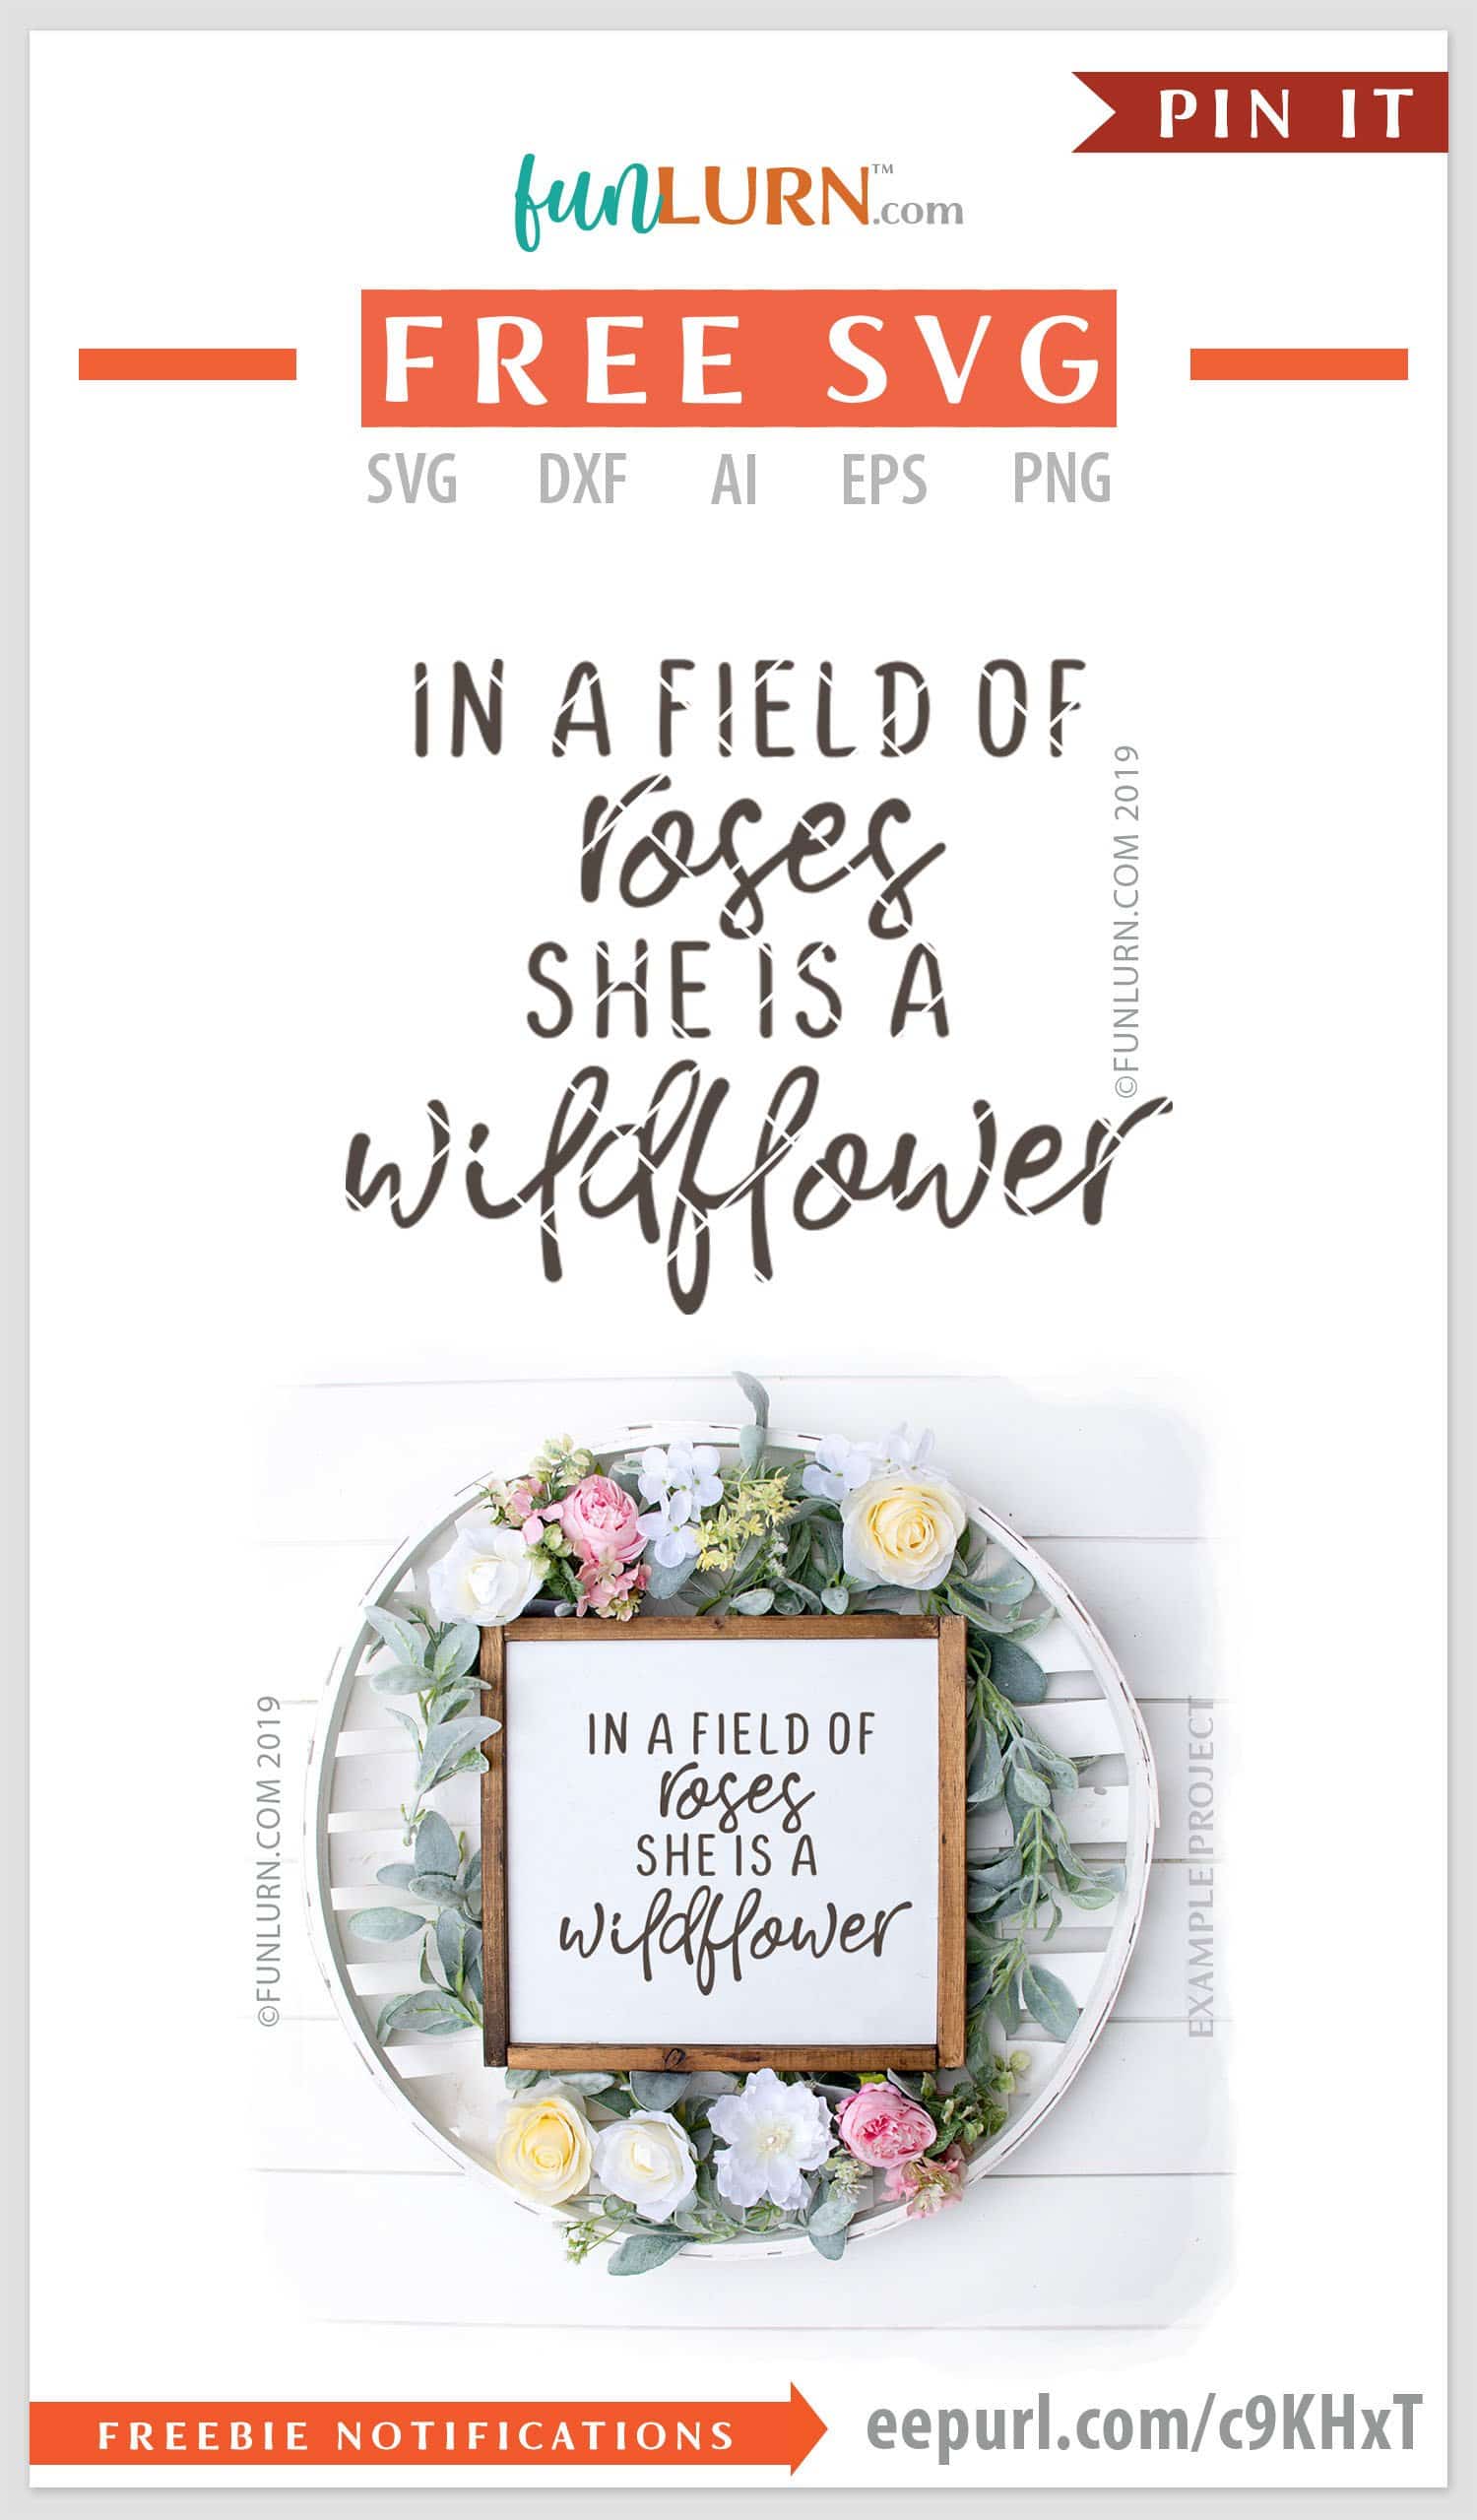 Download In a field of roses she is a wildflower svg - FunLurn